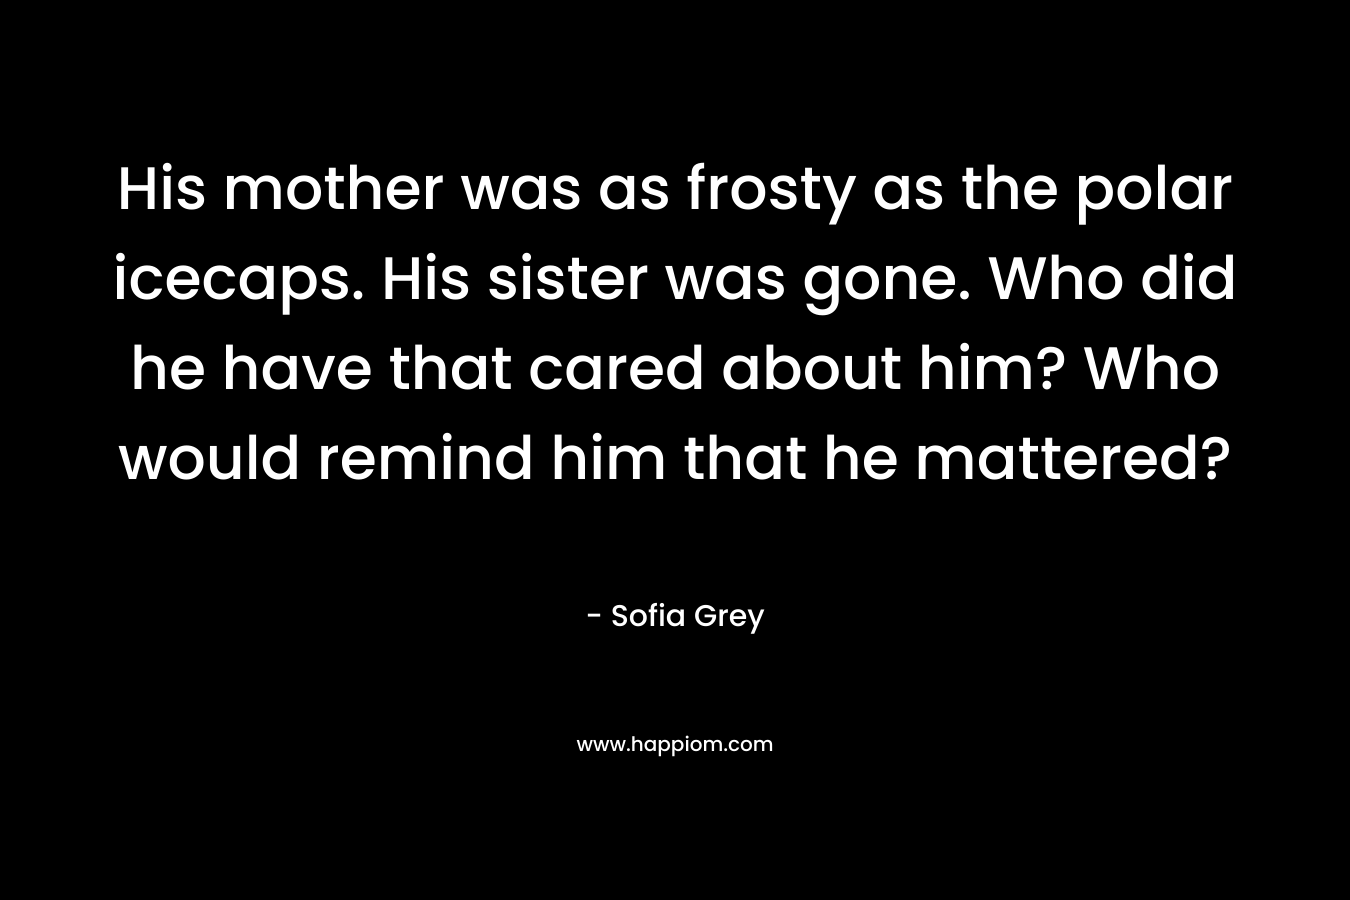 His mother was as frosty as the polar icecaps. His sister was gone. Who did he have that cared about him? Who would remind him that he mattered?